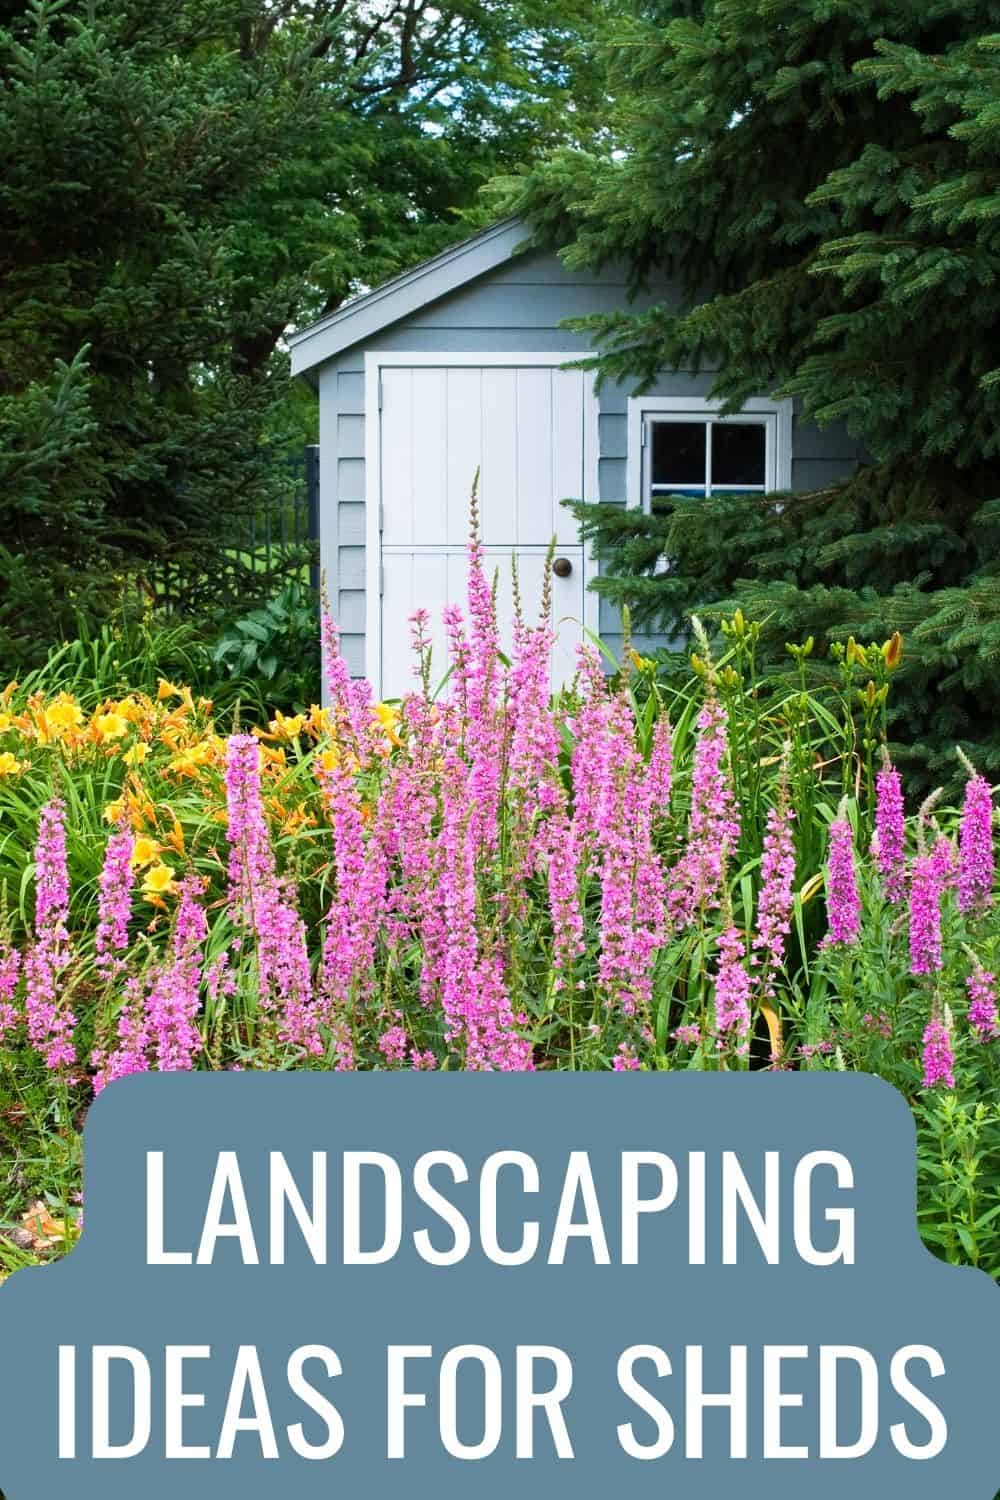 Landscaping ideas for sheds